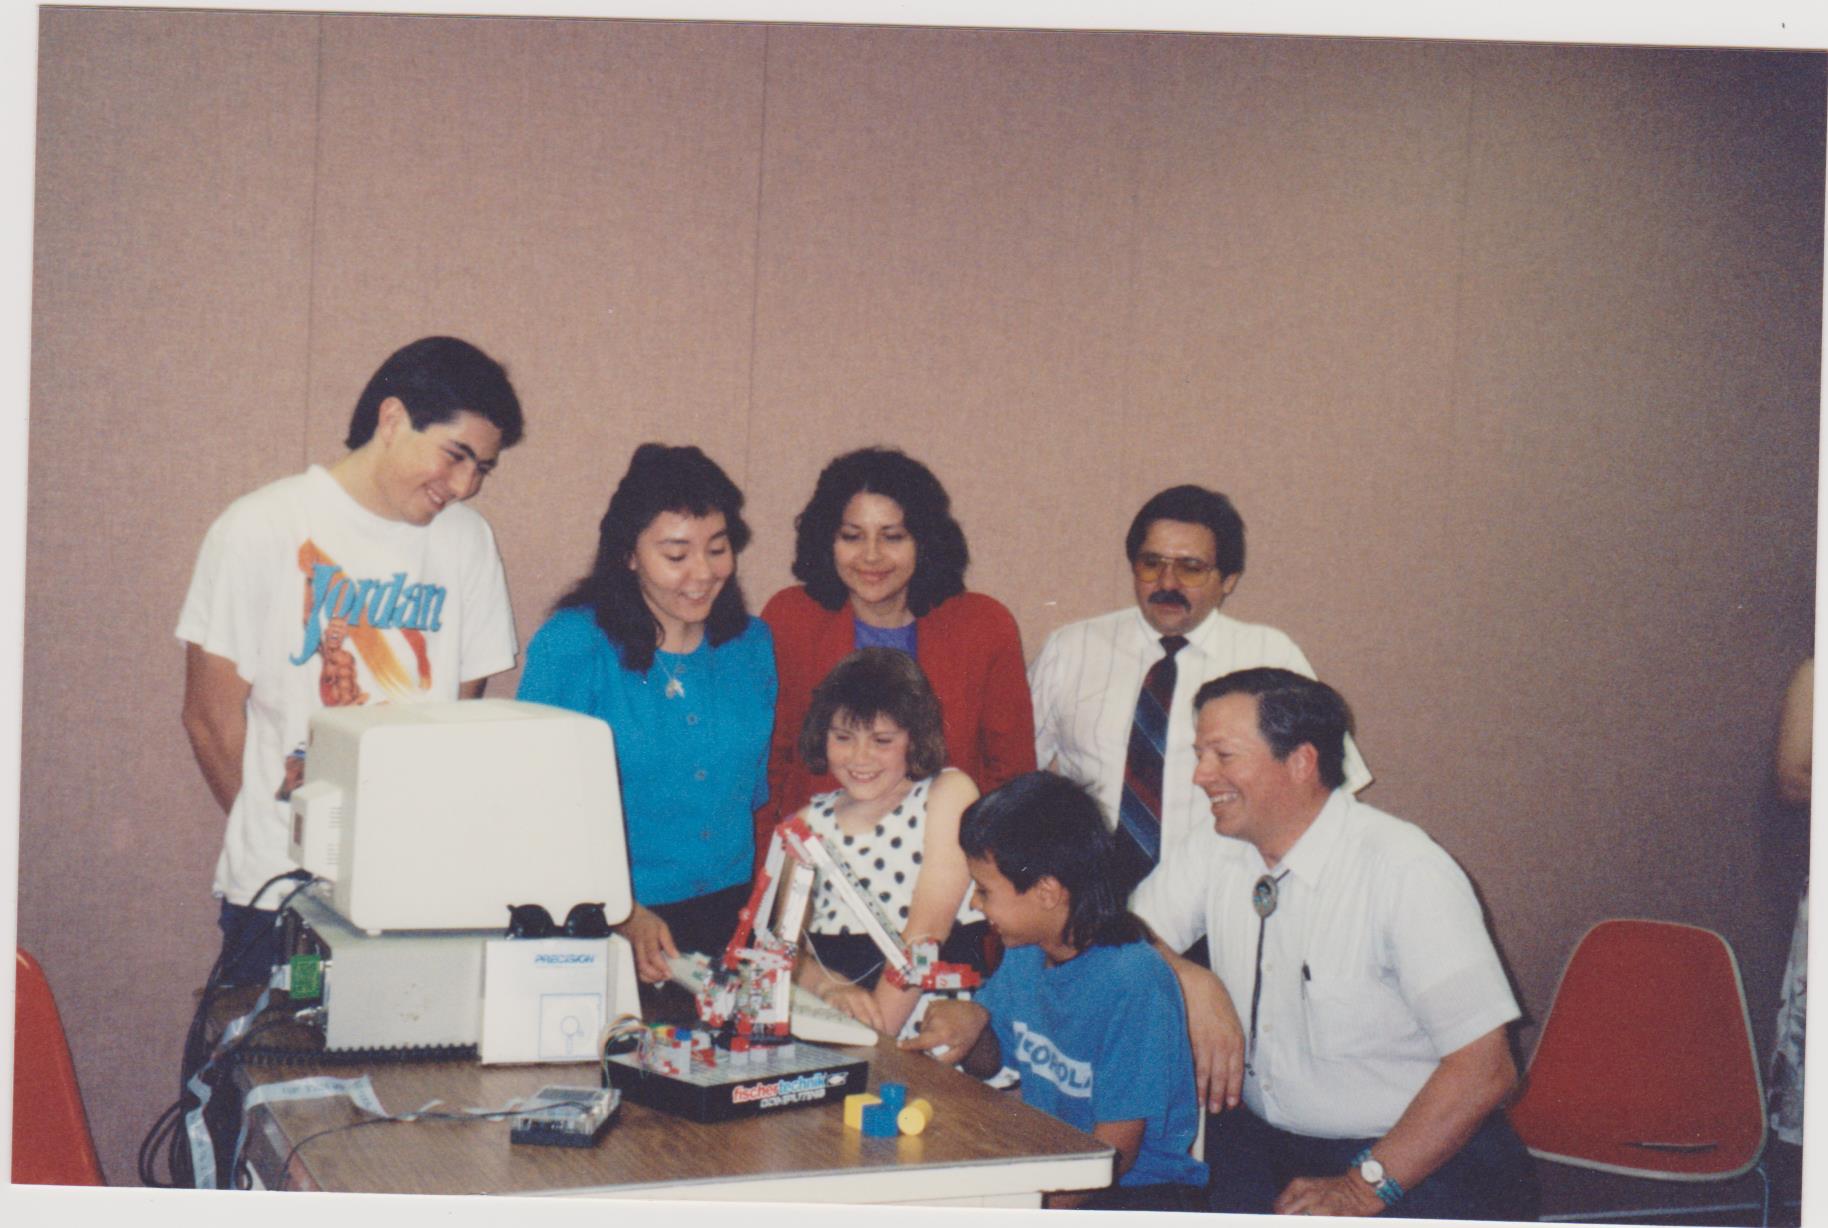 Our alumnus (far right) with colleagues, students, and the robot (Credit: Luna Community College LRC)